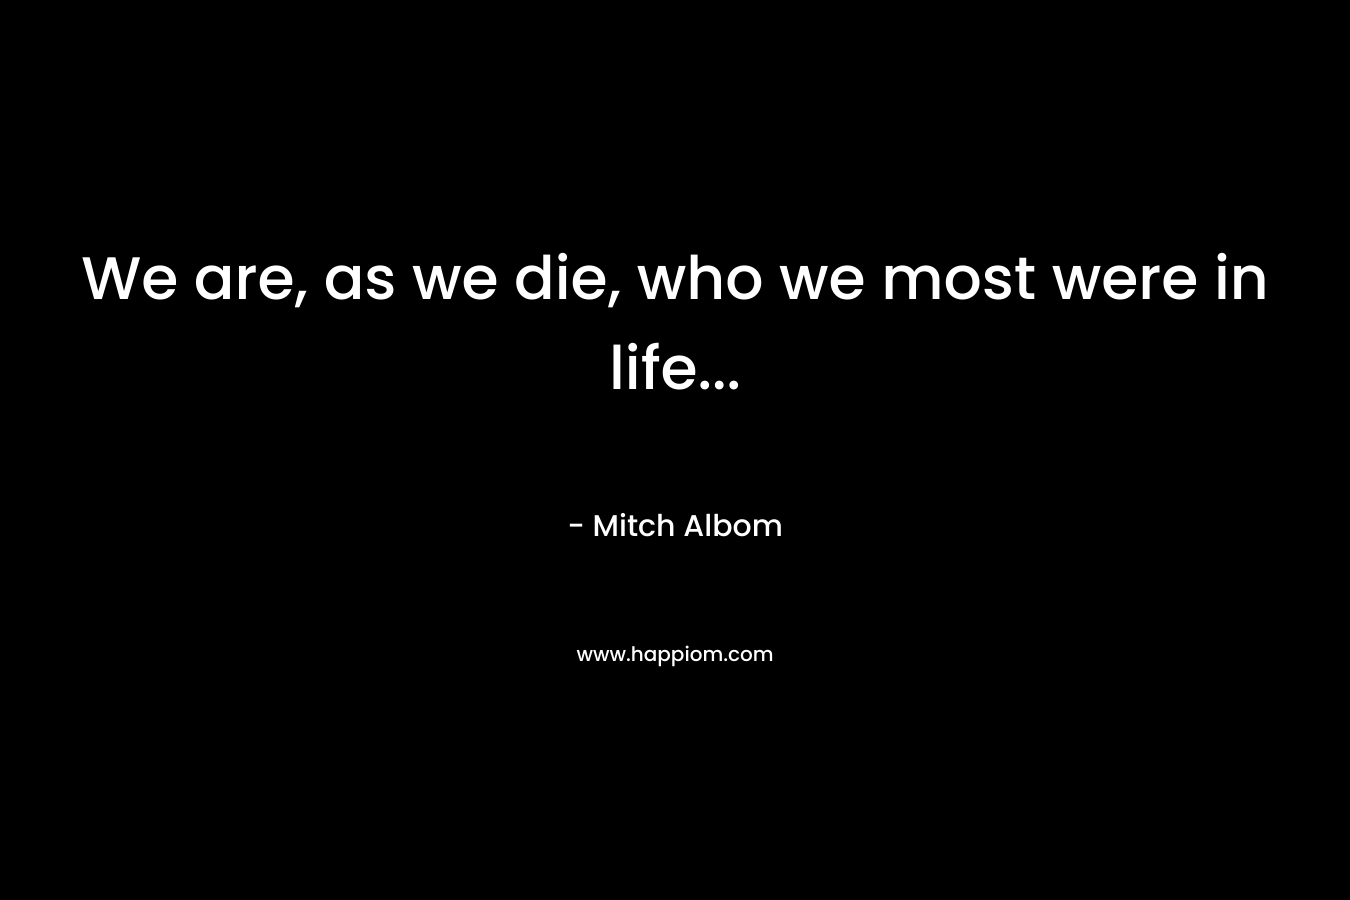 We are, as we die, who we most were in life...